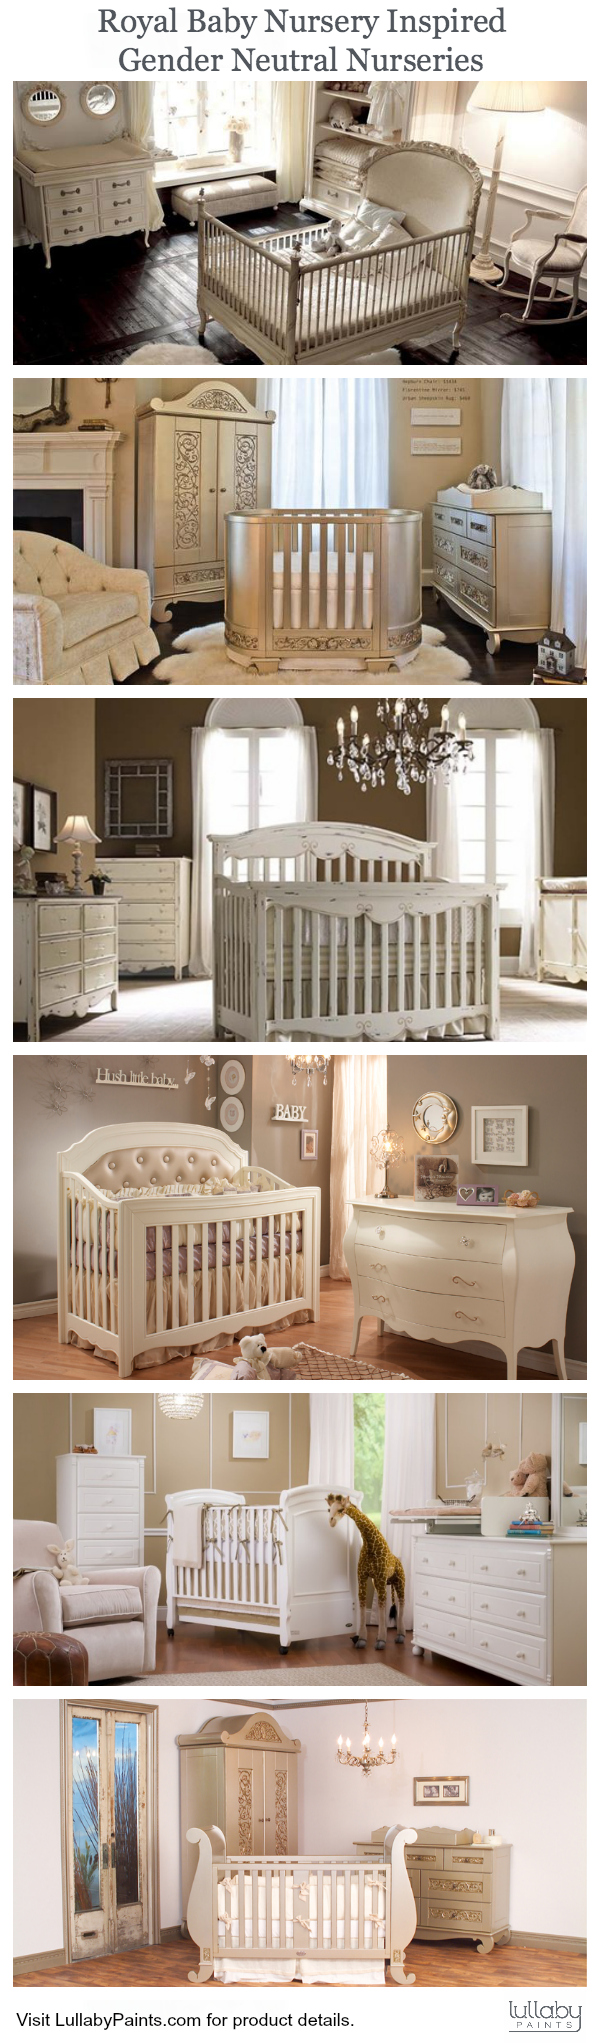 gender neutral, royal baby inspired nursery design - lullaby paints